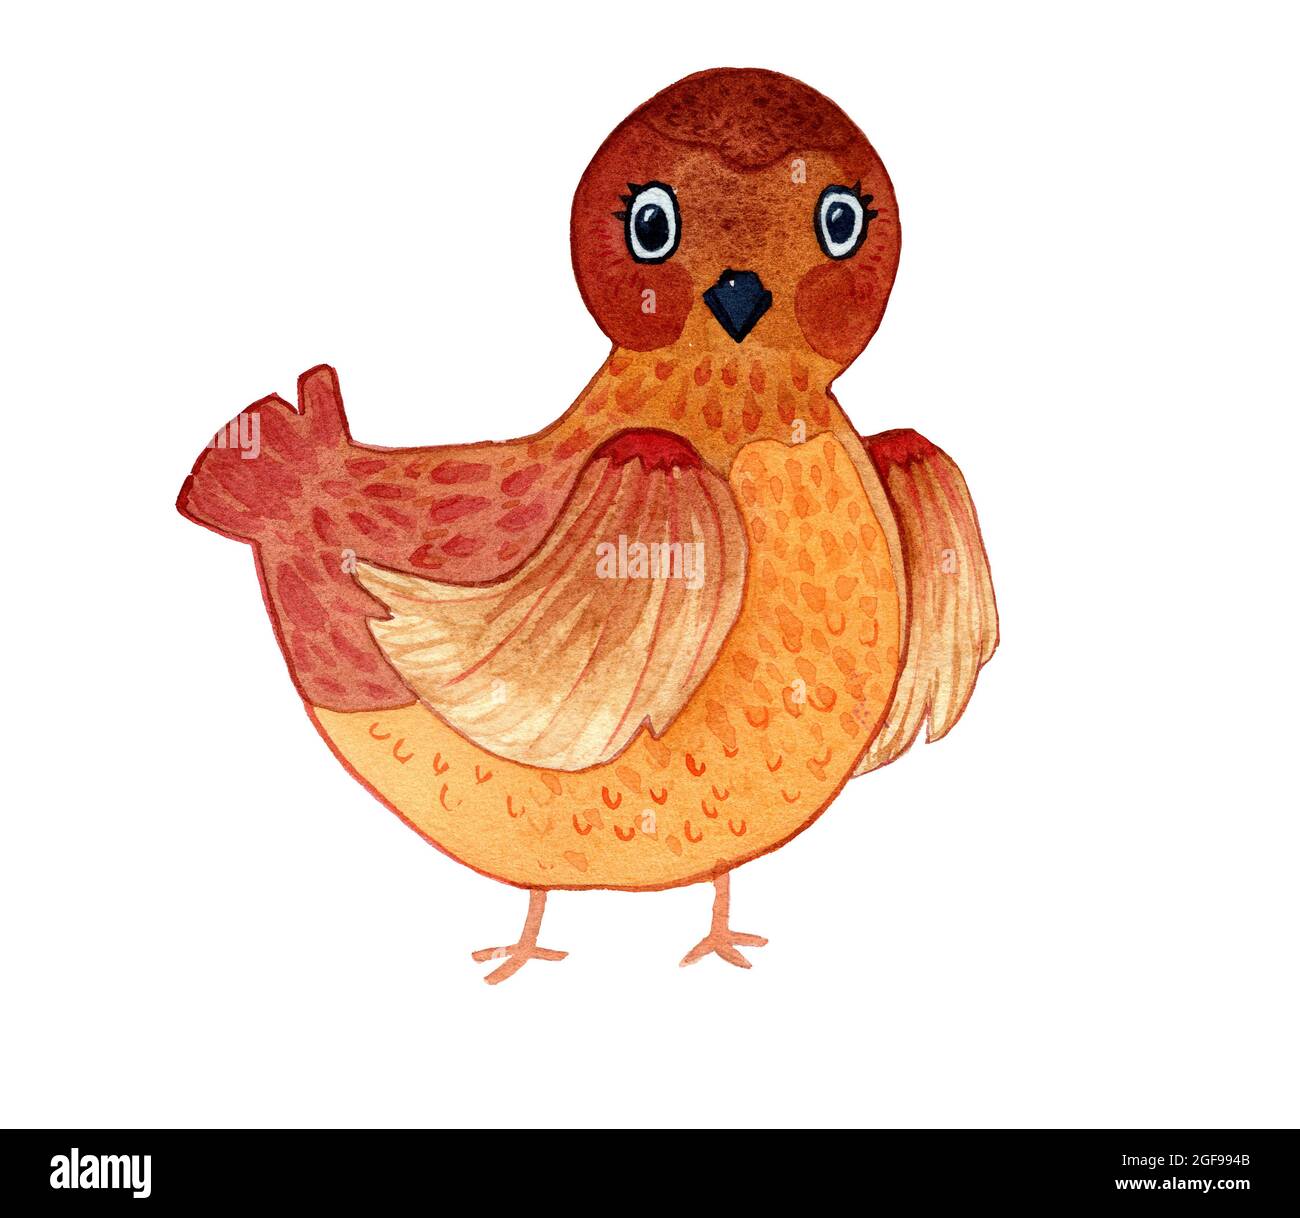 Watercolor hand-drawn illustration of brown hen isolated on white background. Sitting bird in cartoon style. Design for covers, backgrounds, decor Stock Photo